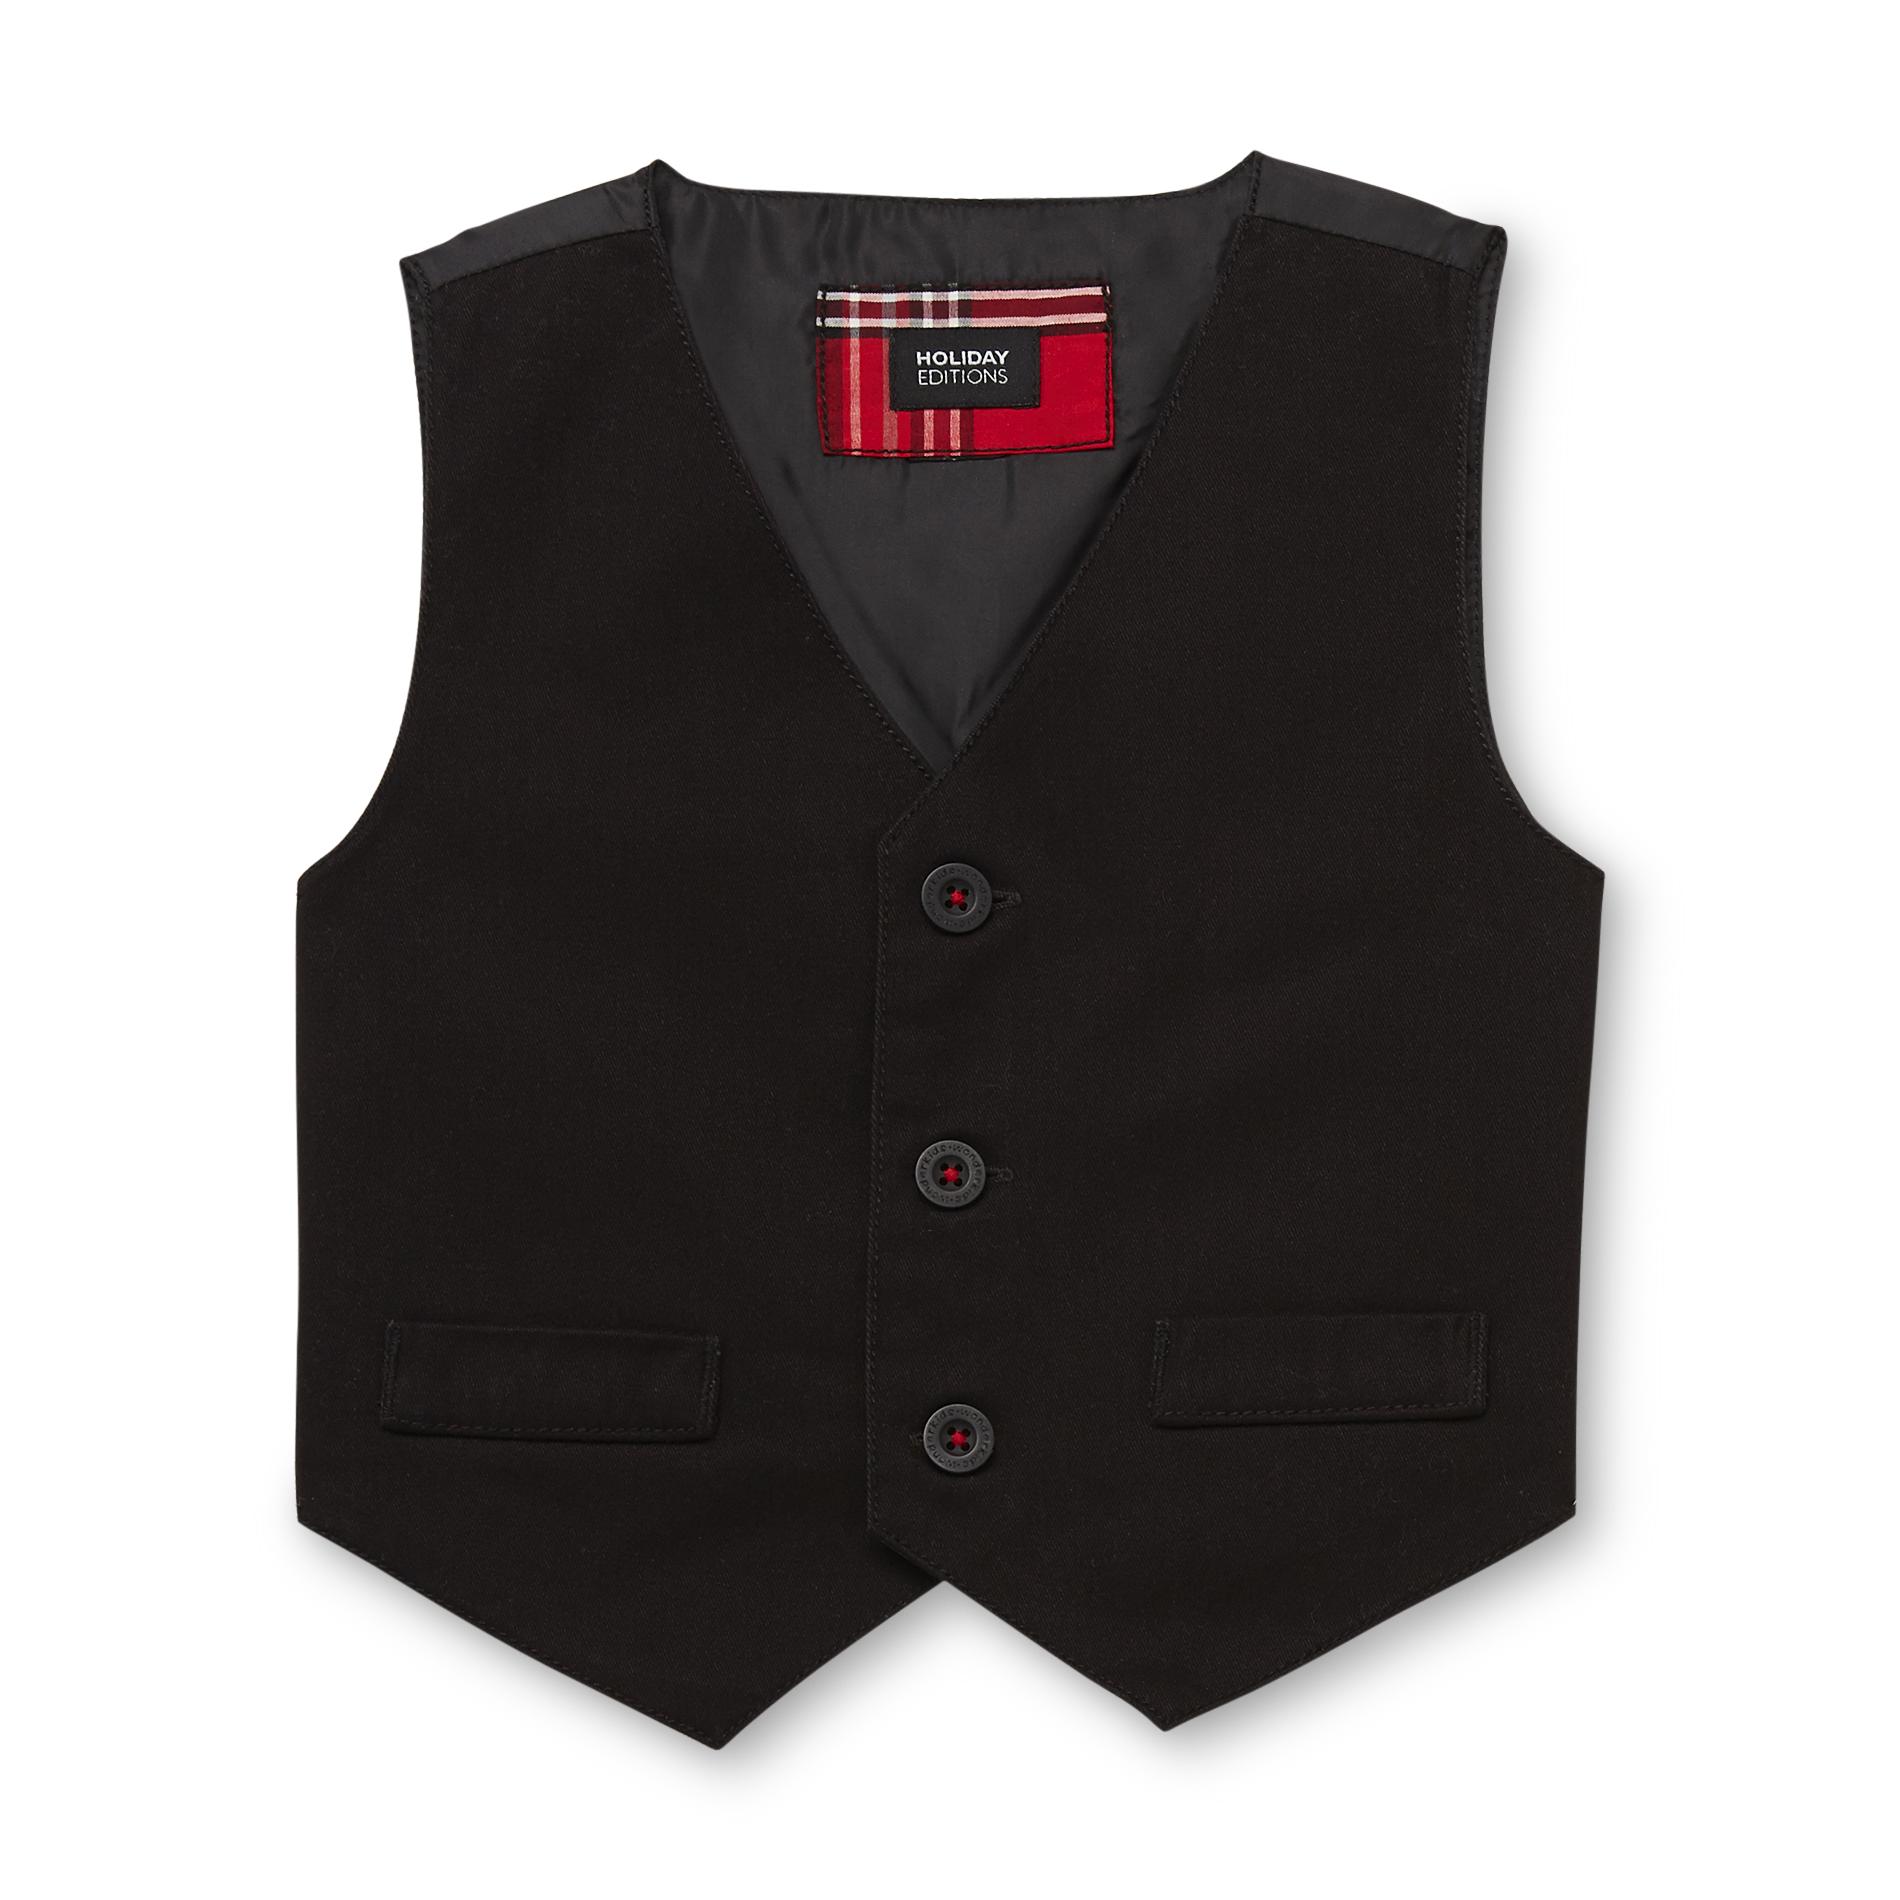 Holiday Editions Infant & Toddler Boy's Twill Vest